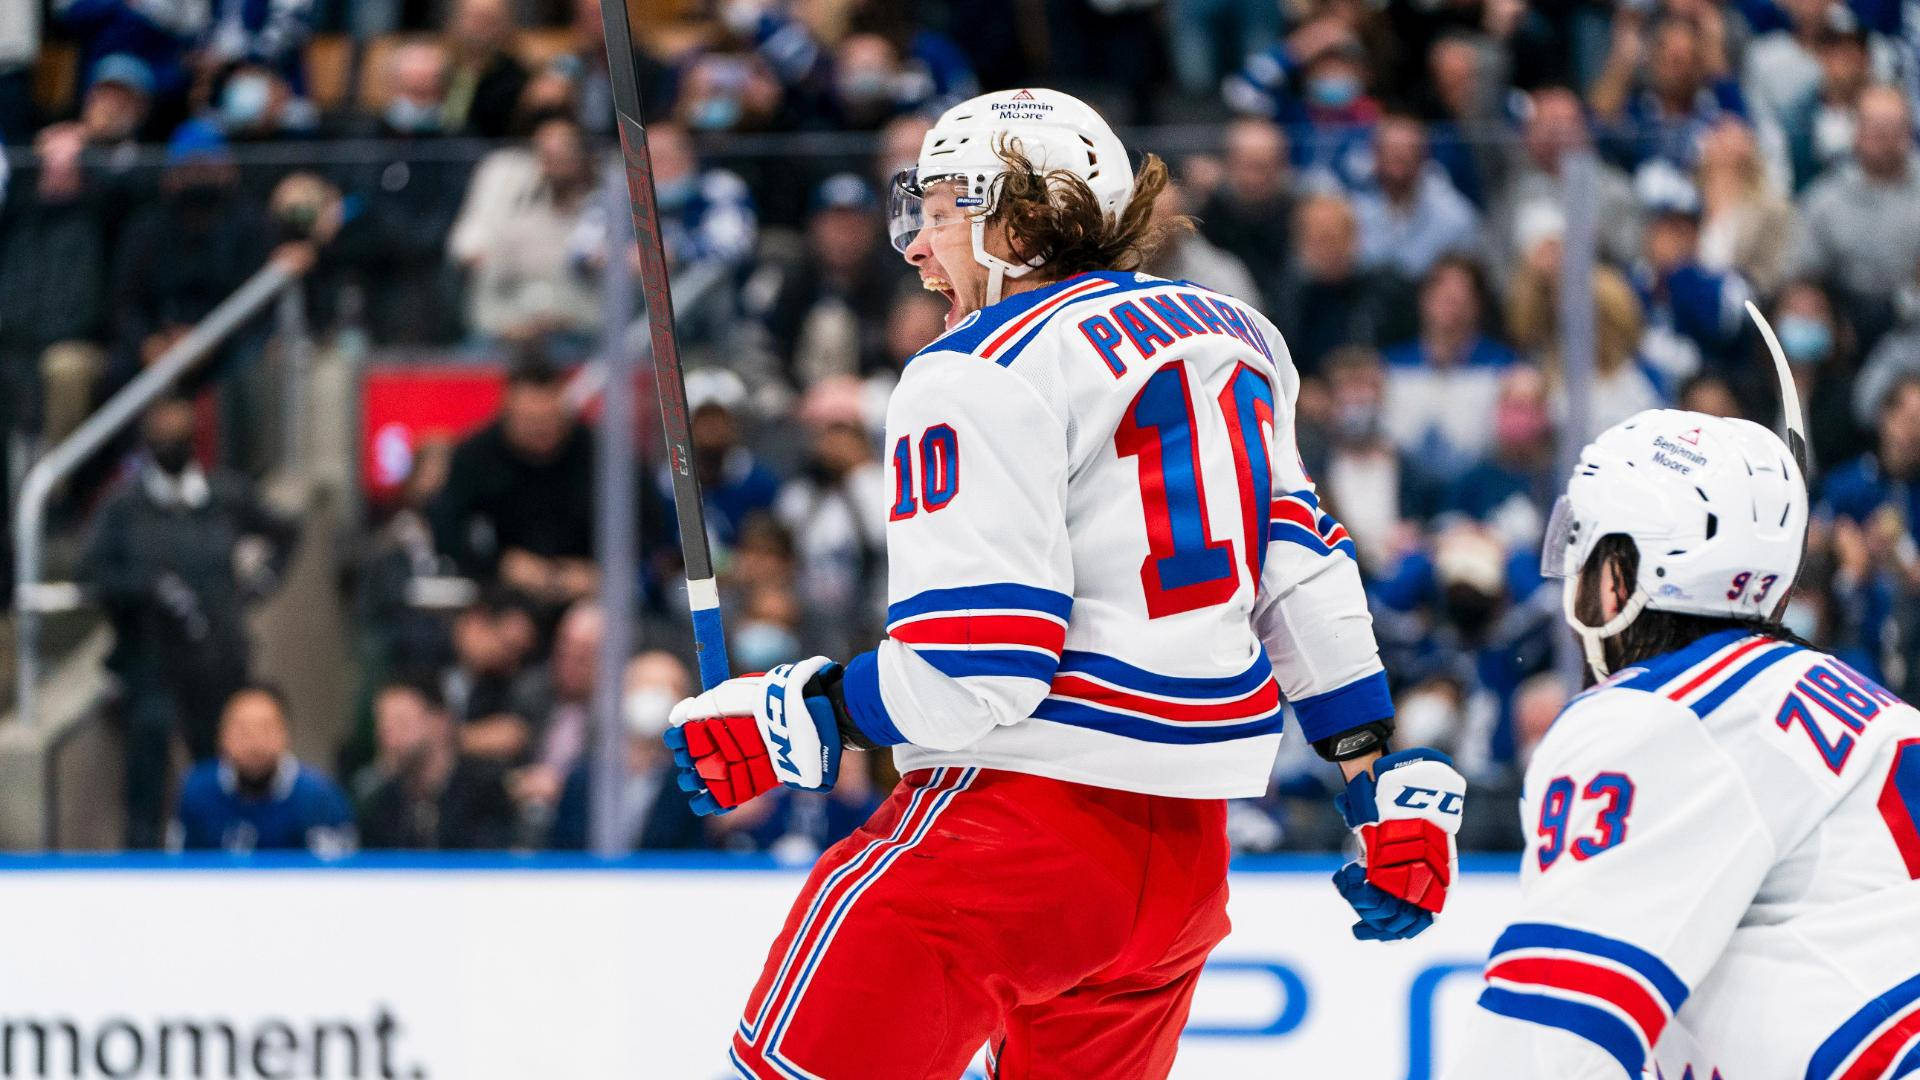 1920X1080 New York Rangers Wallpaper and Background